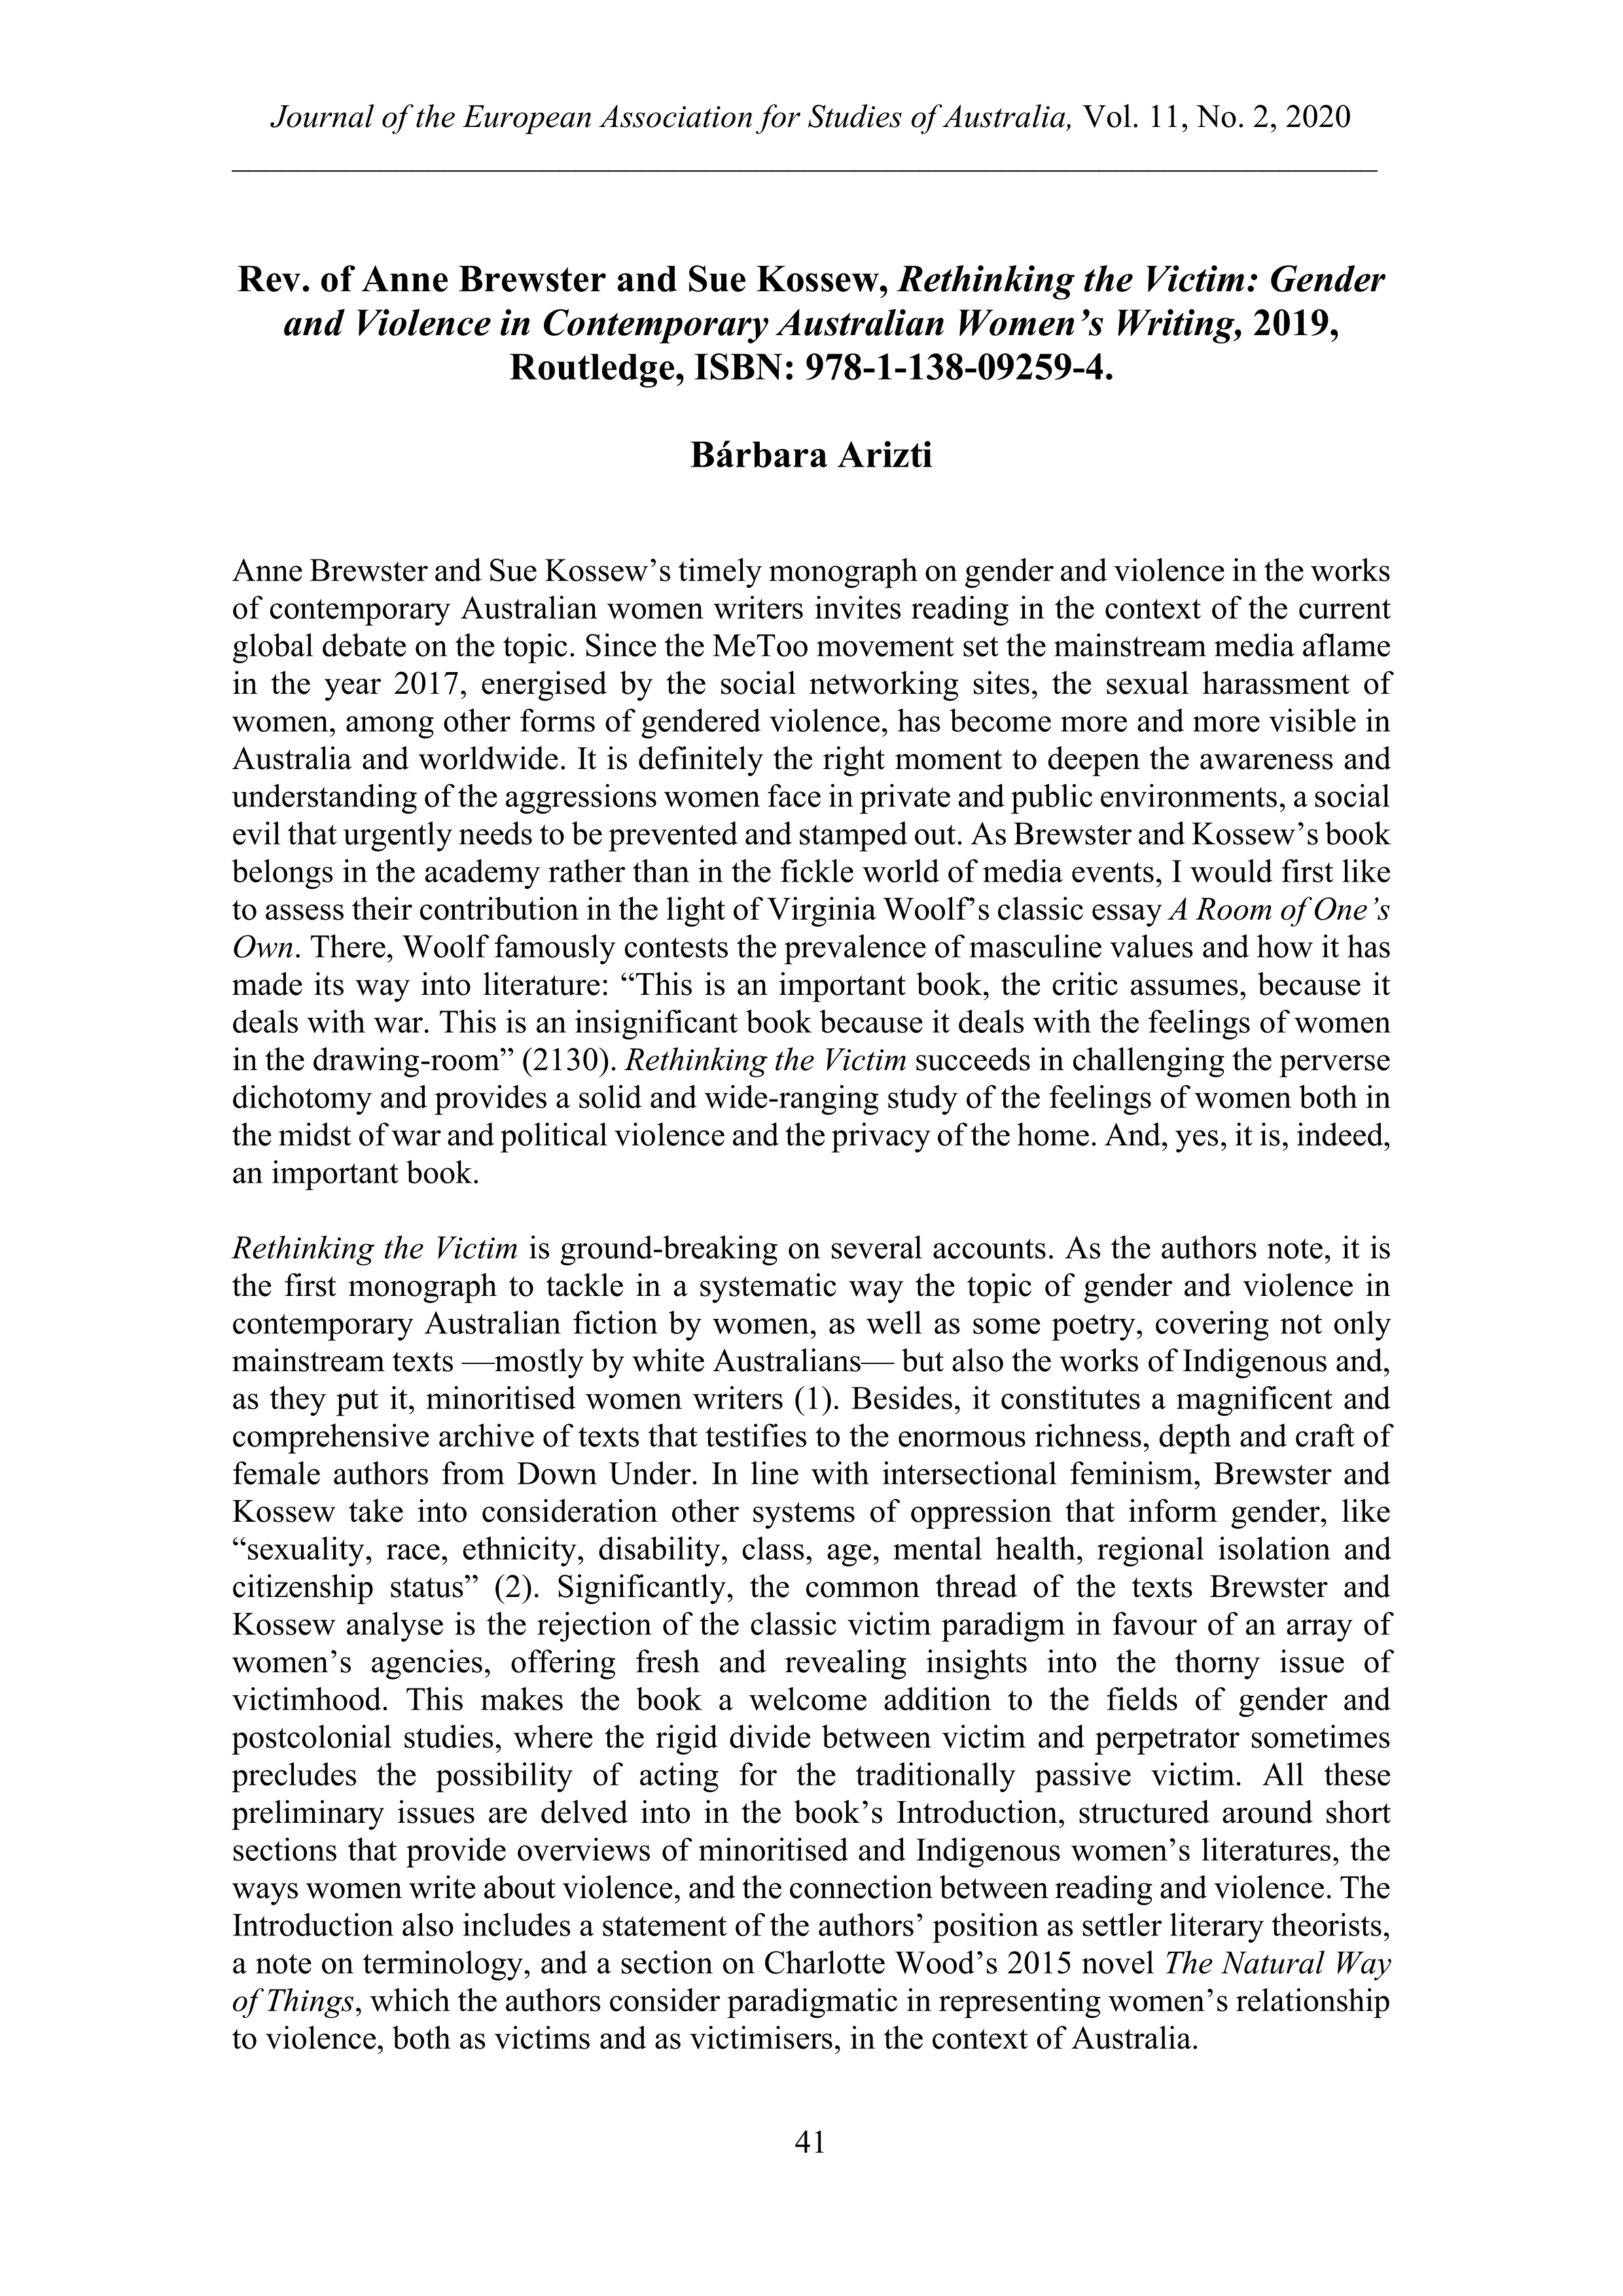 Rev. of Anne Brewster and Sue Kossew, Rethinking the Victim: Gender and Violence in Contemporary Australian Women’s Writing (Routledge 2019)